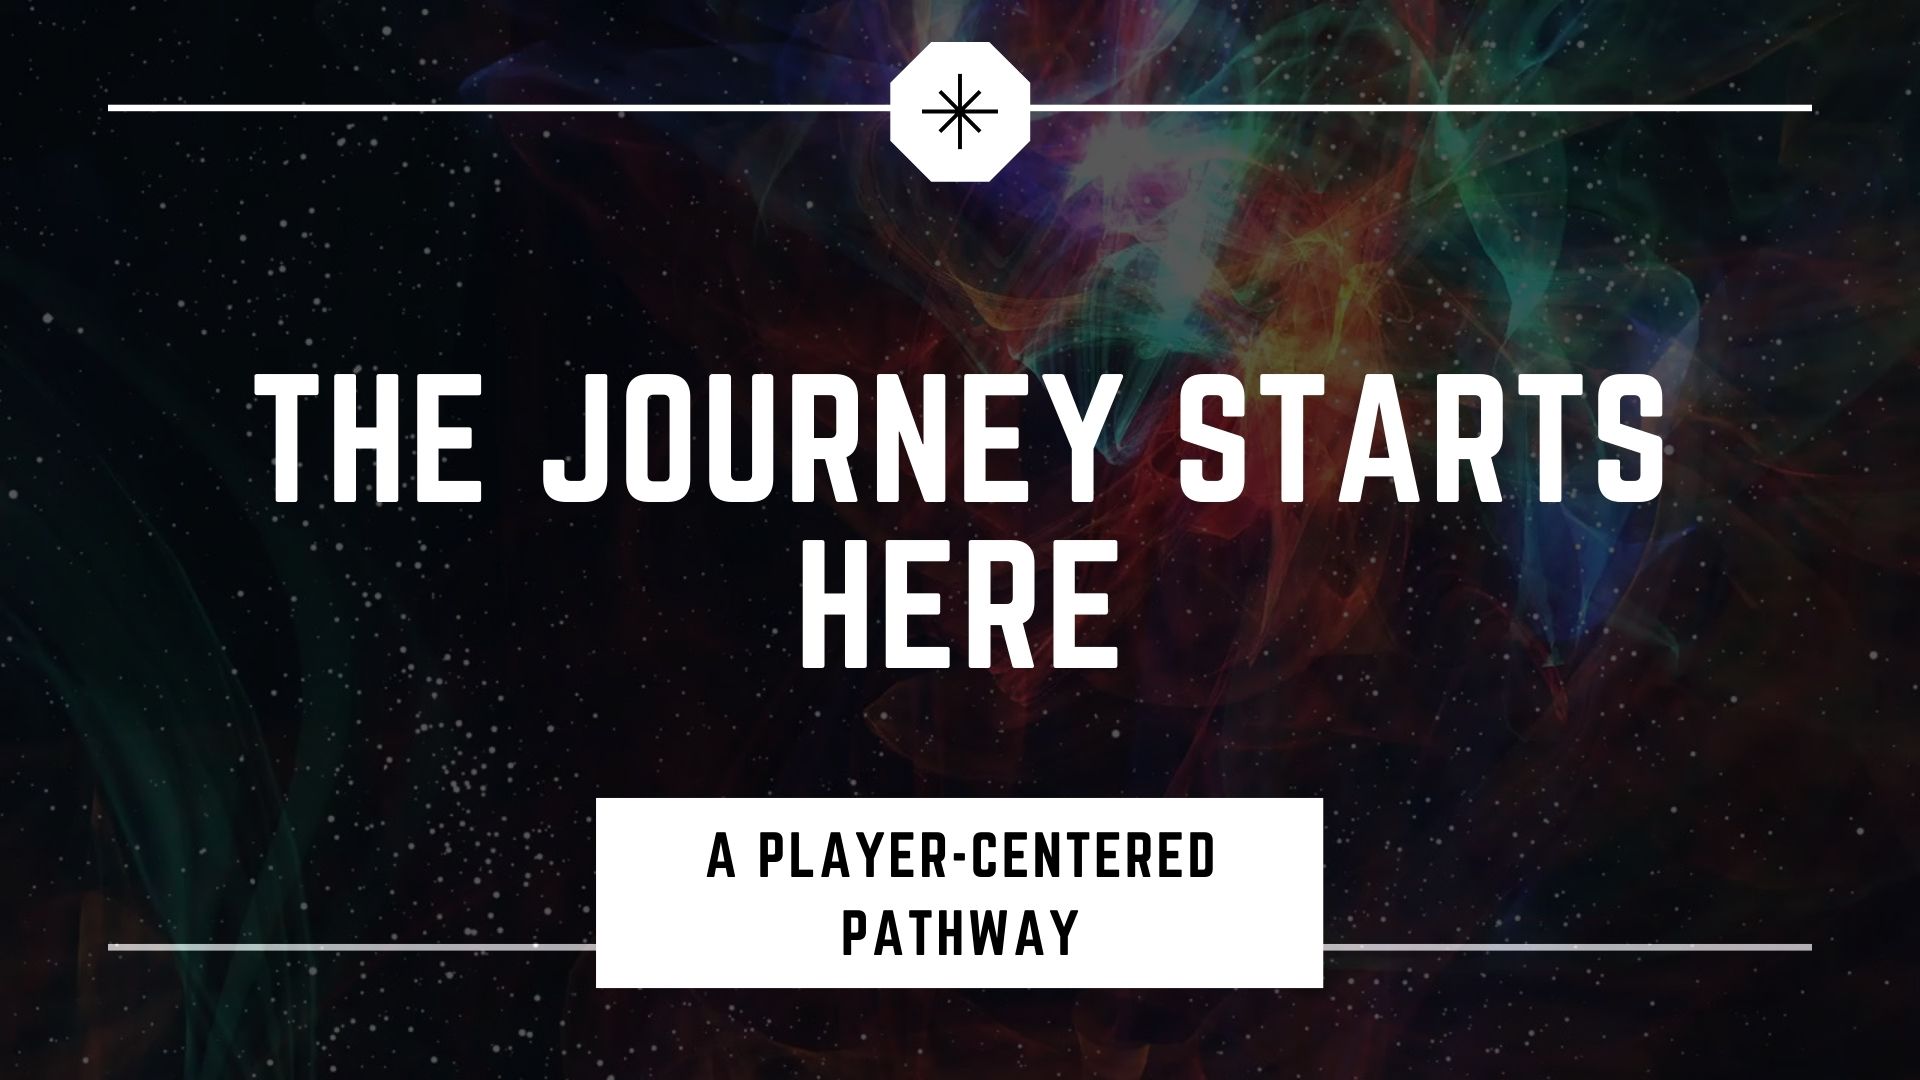 Your Journey Starts Here